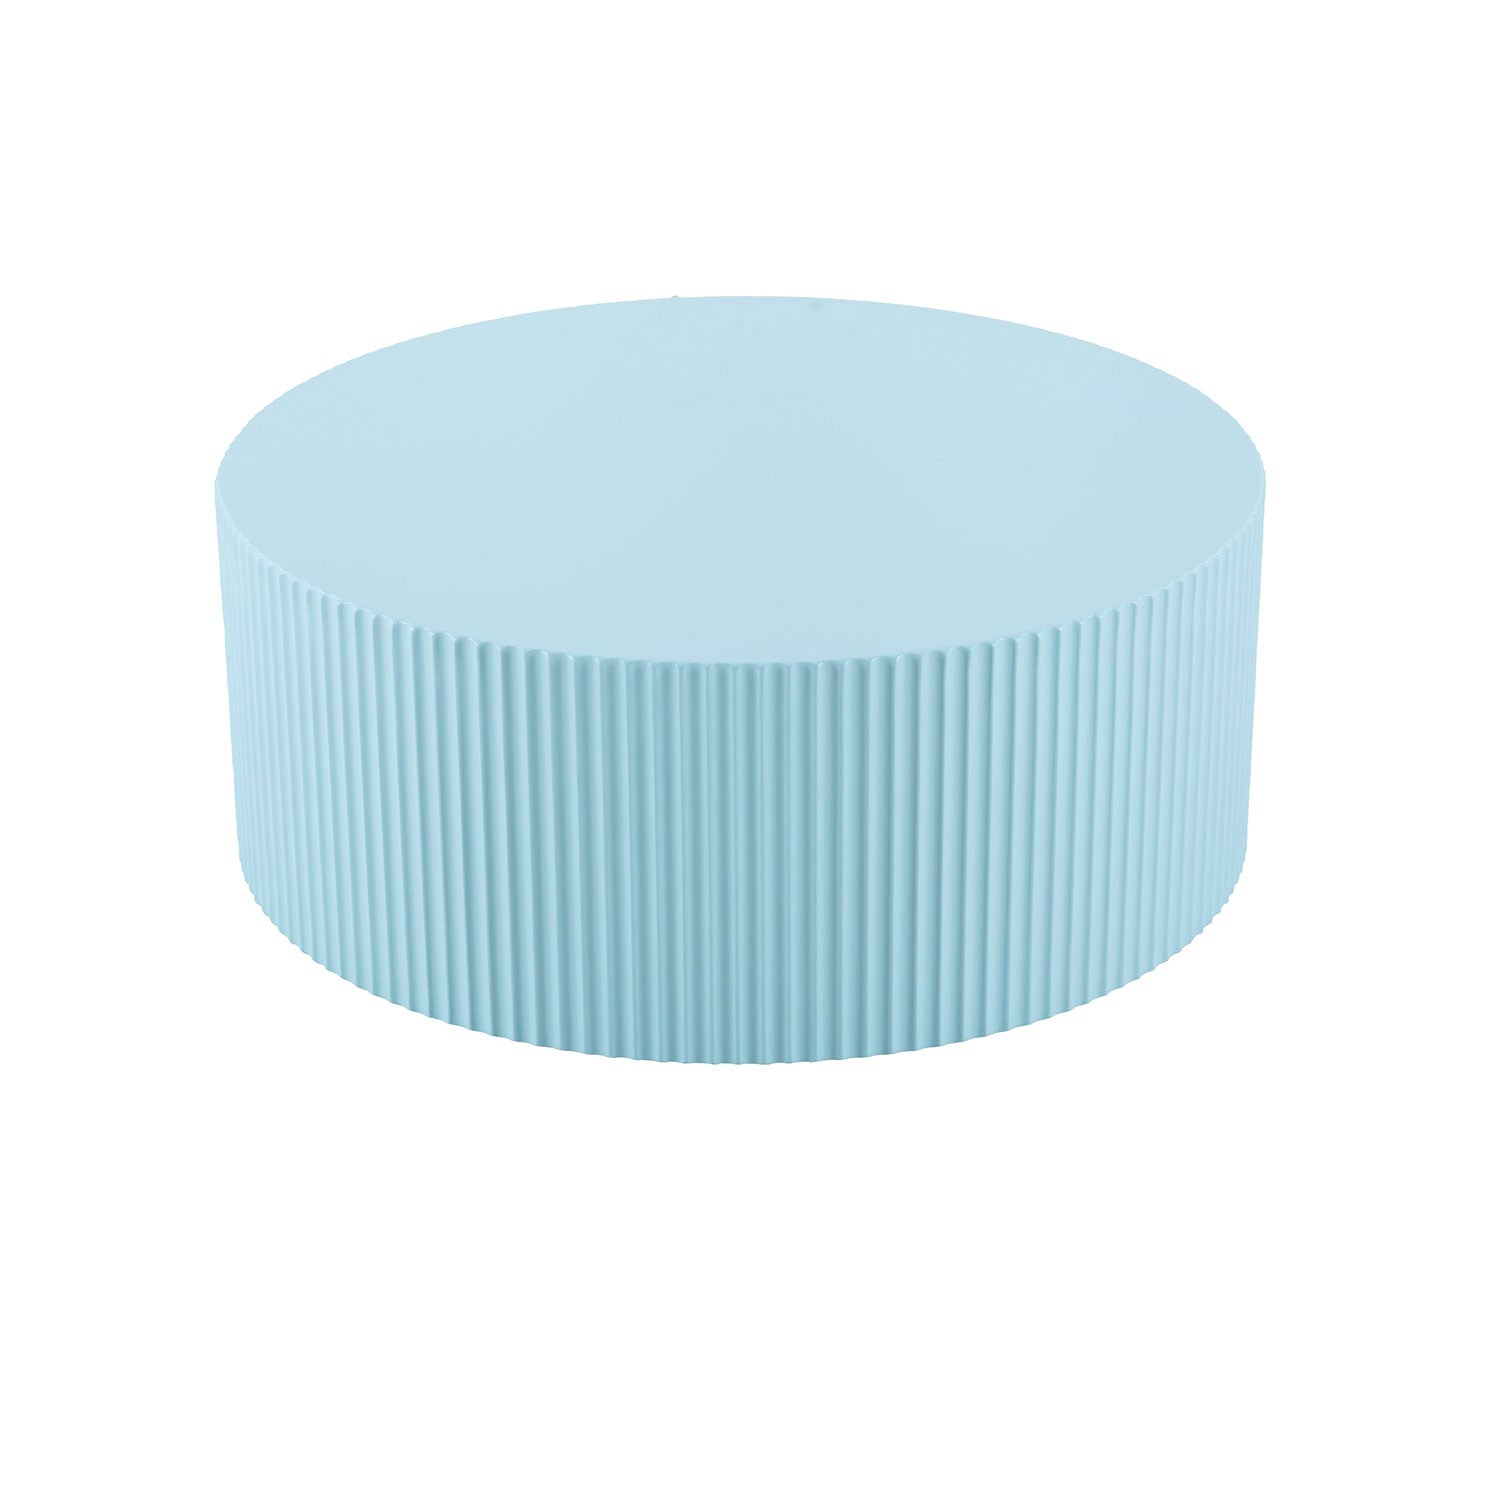 Justone Modern Round Relief Design Coffee Table - Light Blue